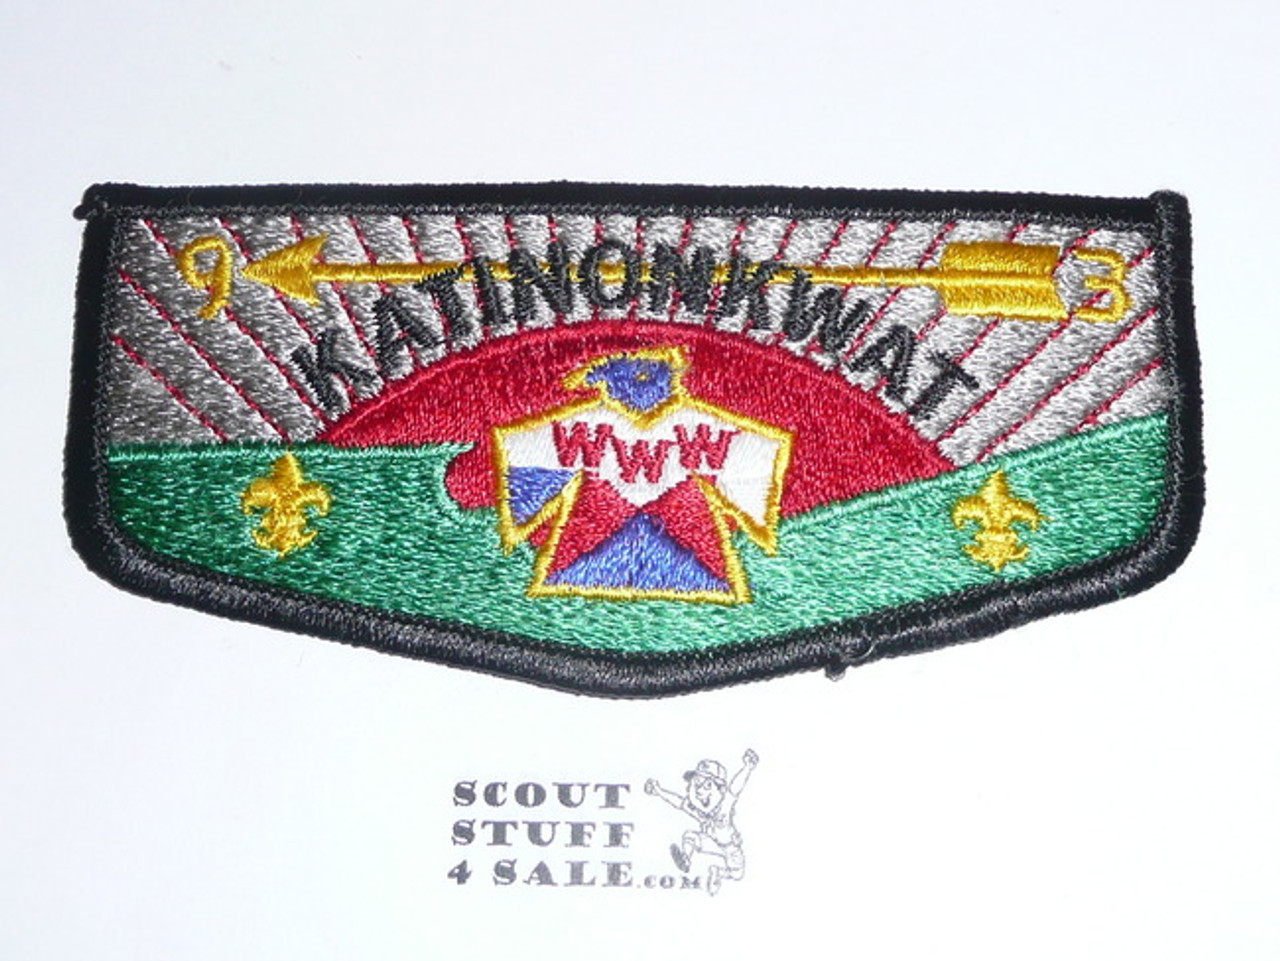 Order of the Arrow Lodge #93 Katinonkwat s7 Flap Patch